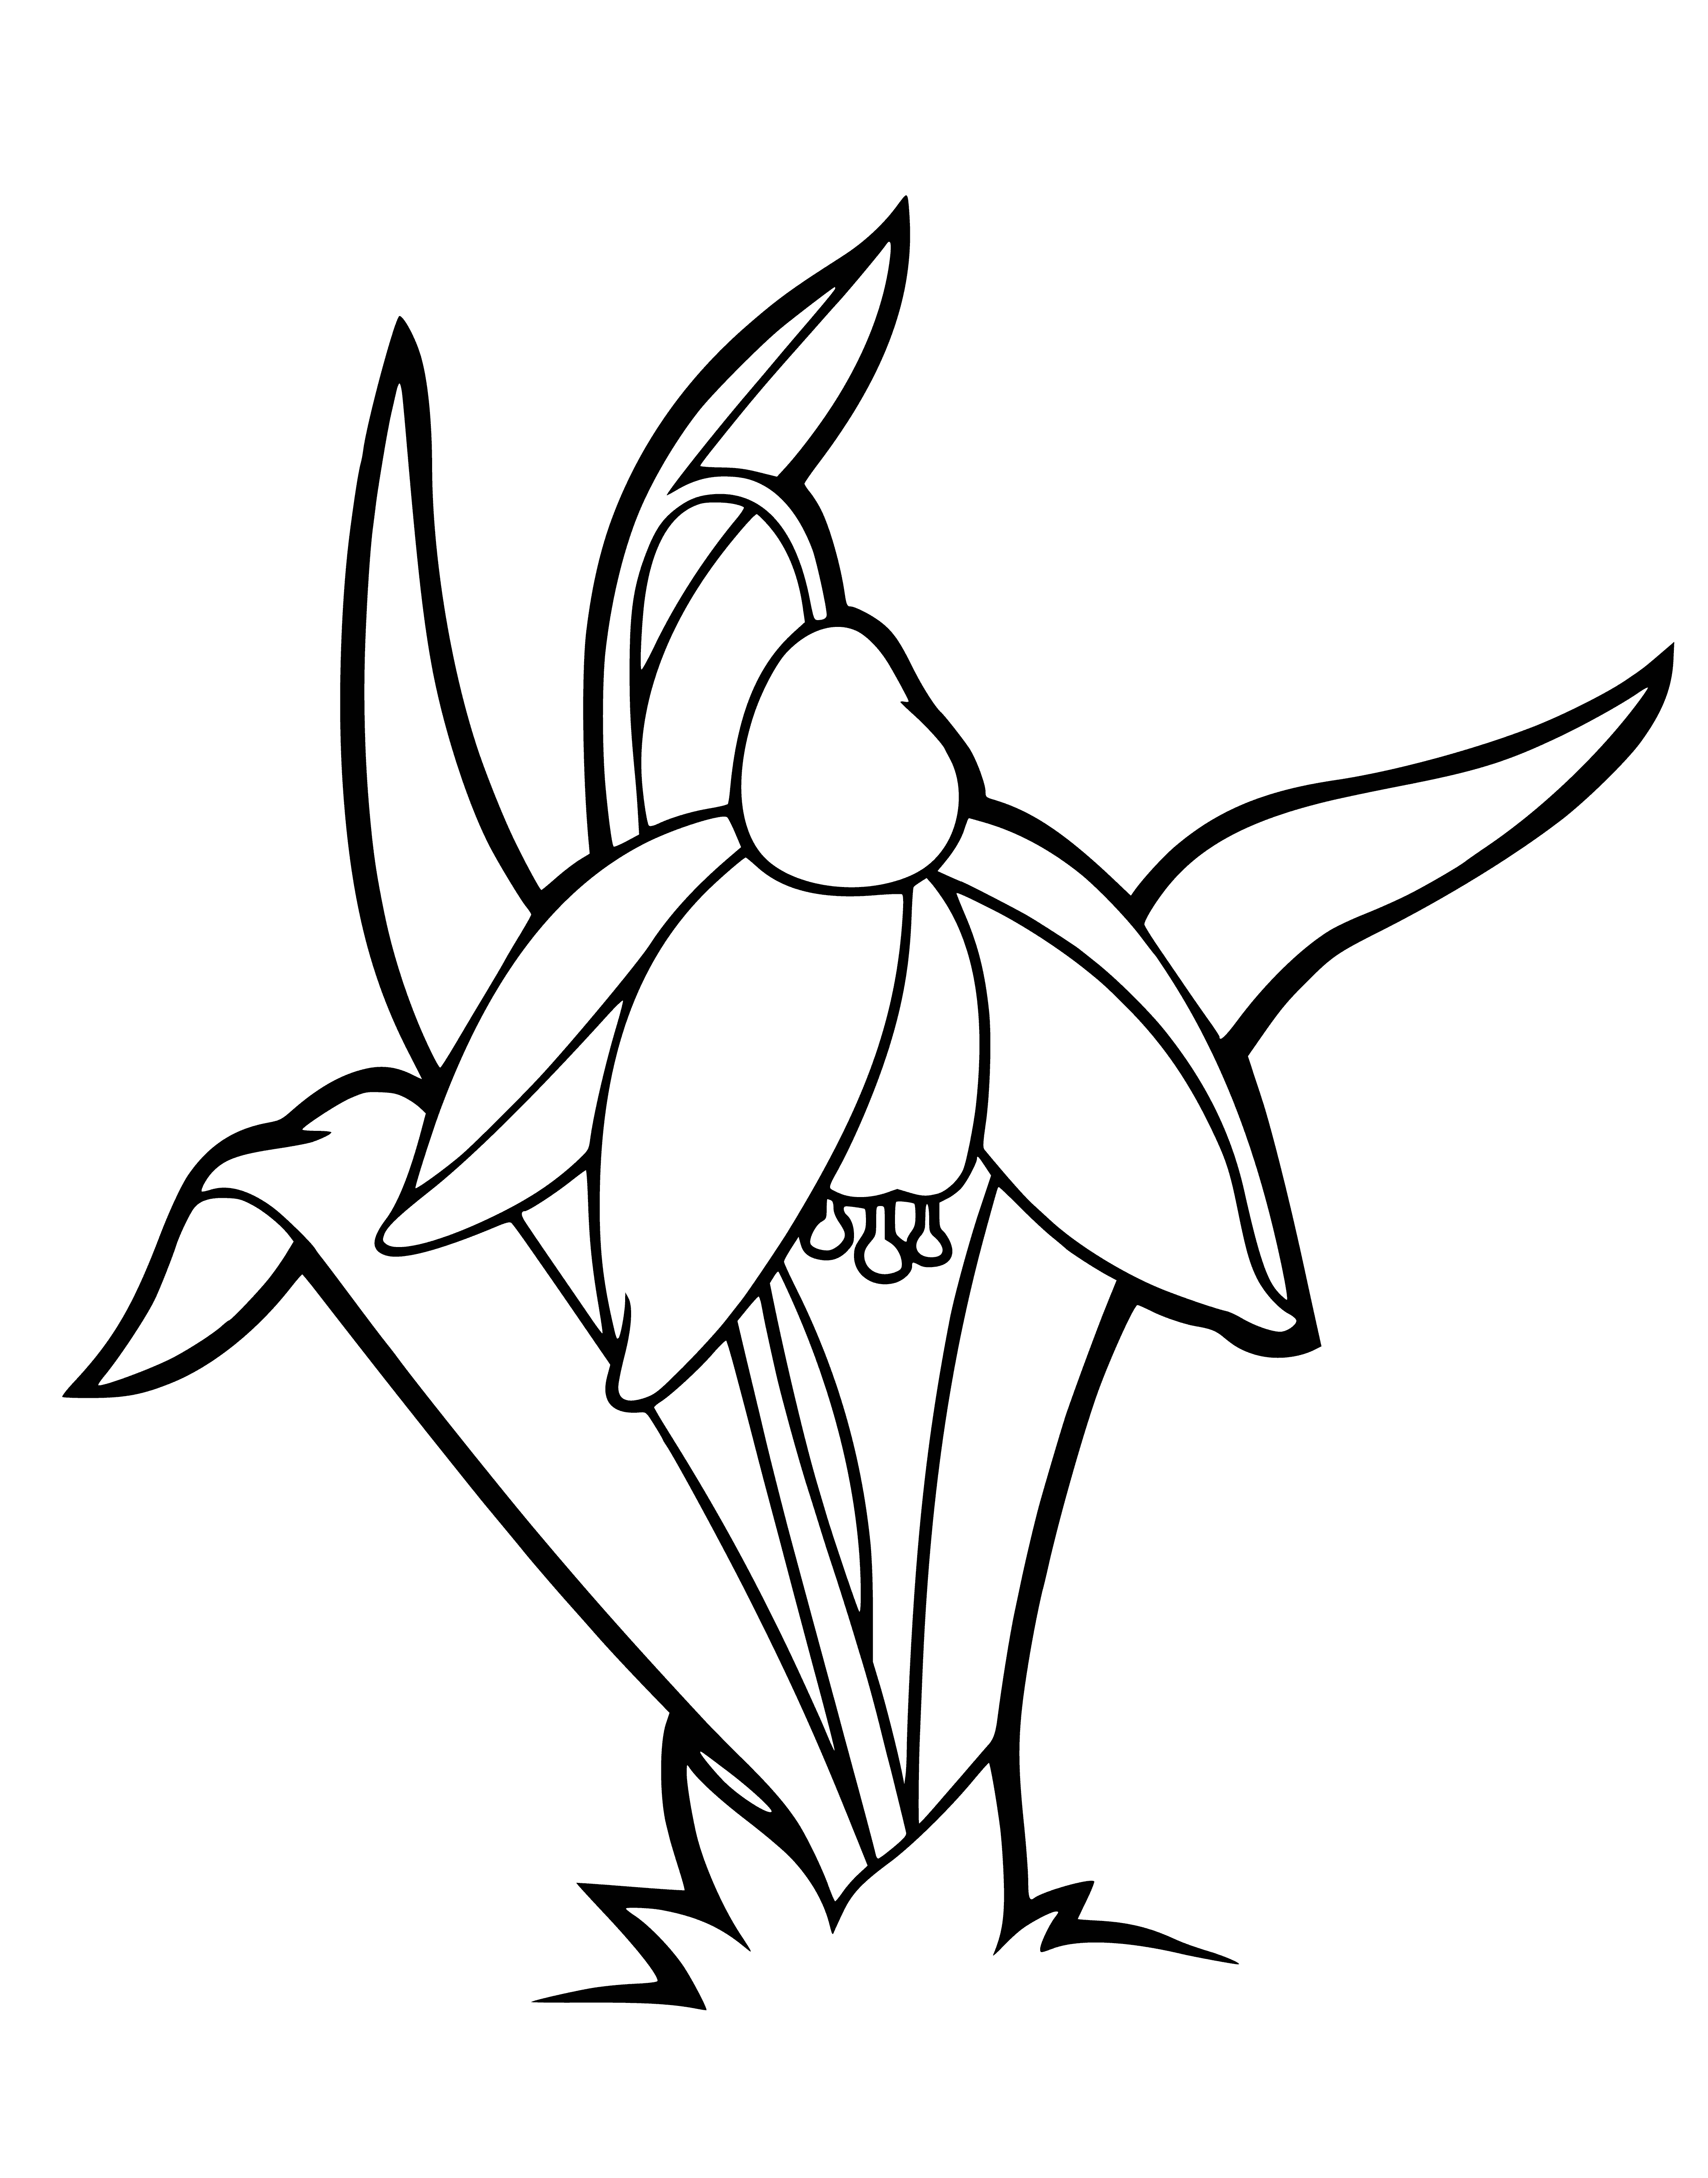 coloring page: Beautiful snowdrop with a long stem and 6 white petals with yellow center - isn't it pretty? #Nature #Flowers